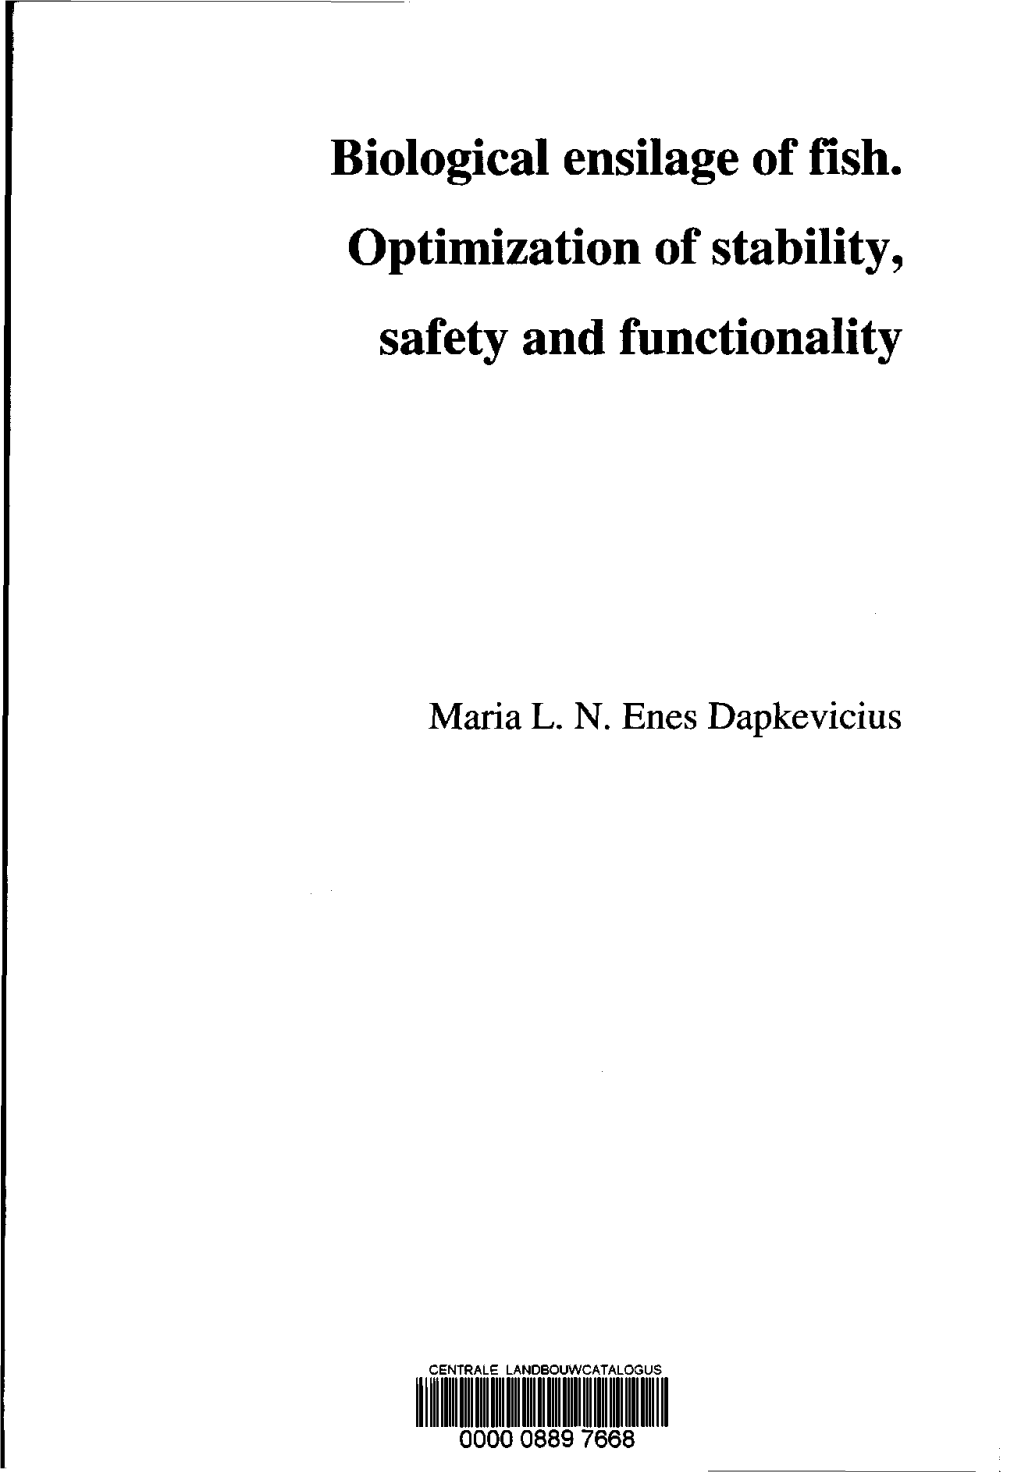 Biological Ensilage of Fish. Optimization of Stability, Safety and Functionality - 2002 Phd Thesis Wageningen University, Wageningen, the Netherlands